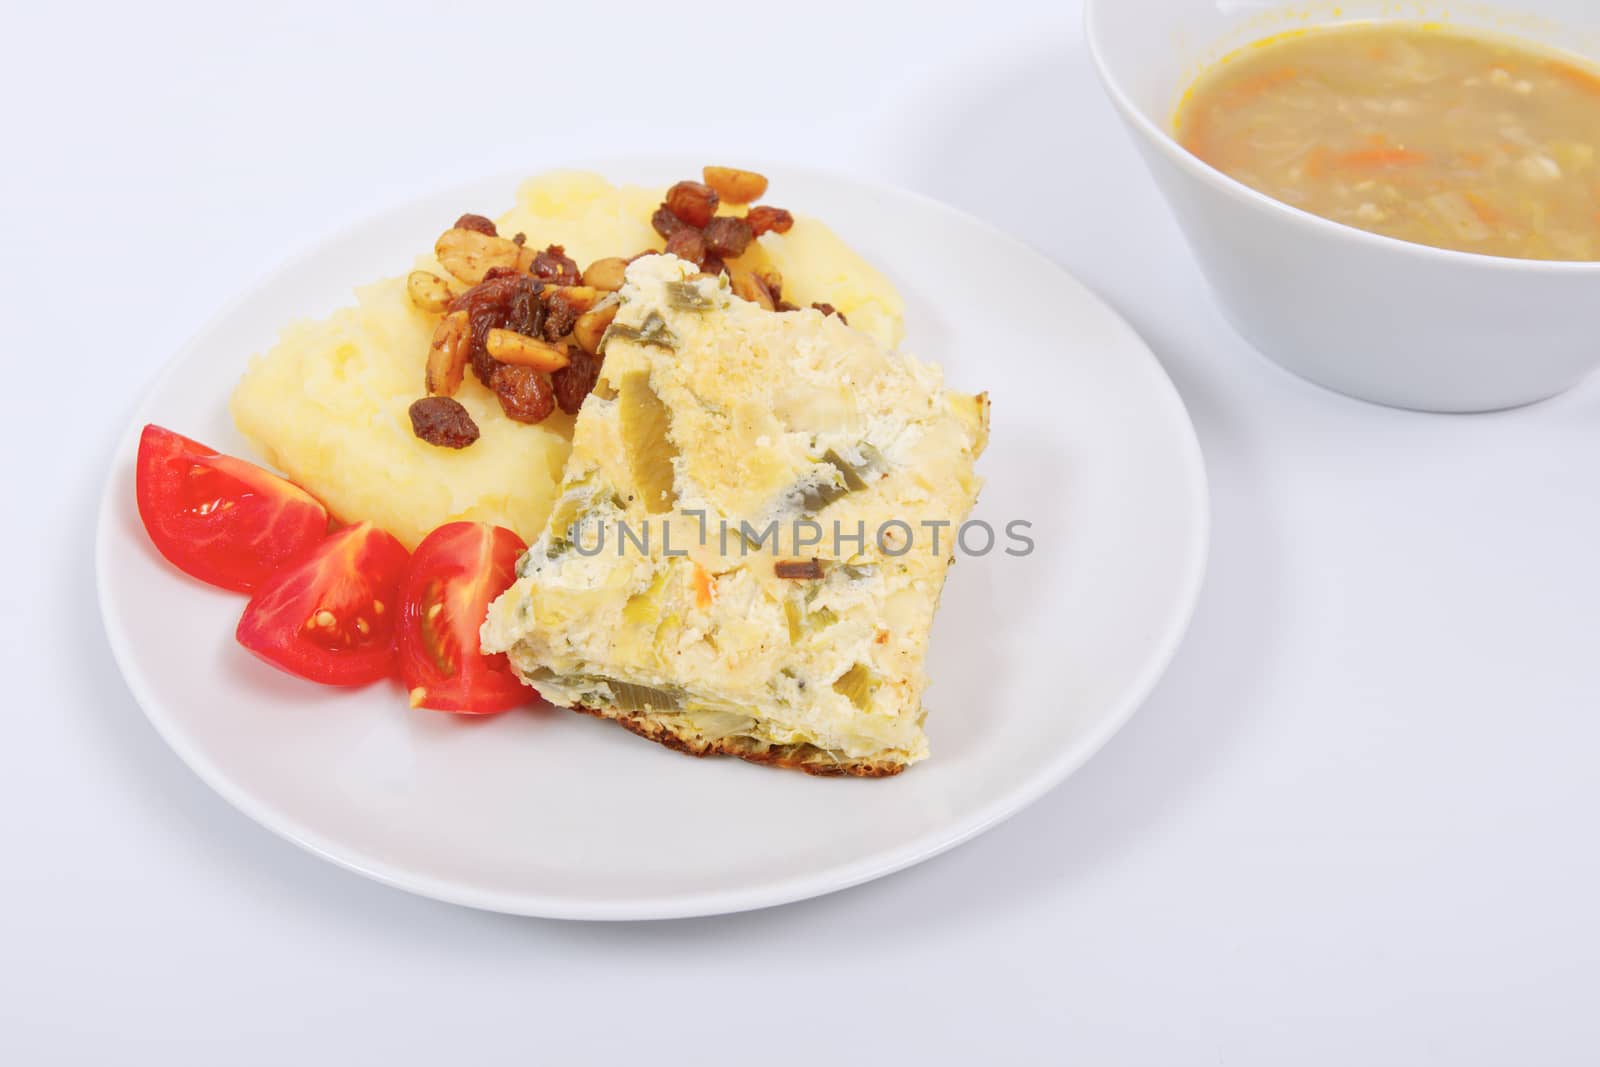 Baked leek with mashed potatoes on a white background